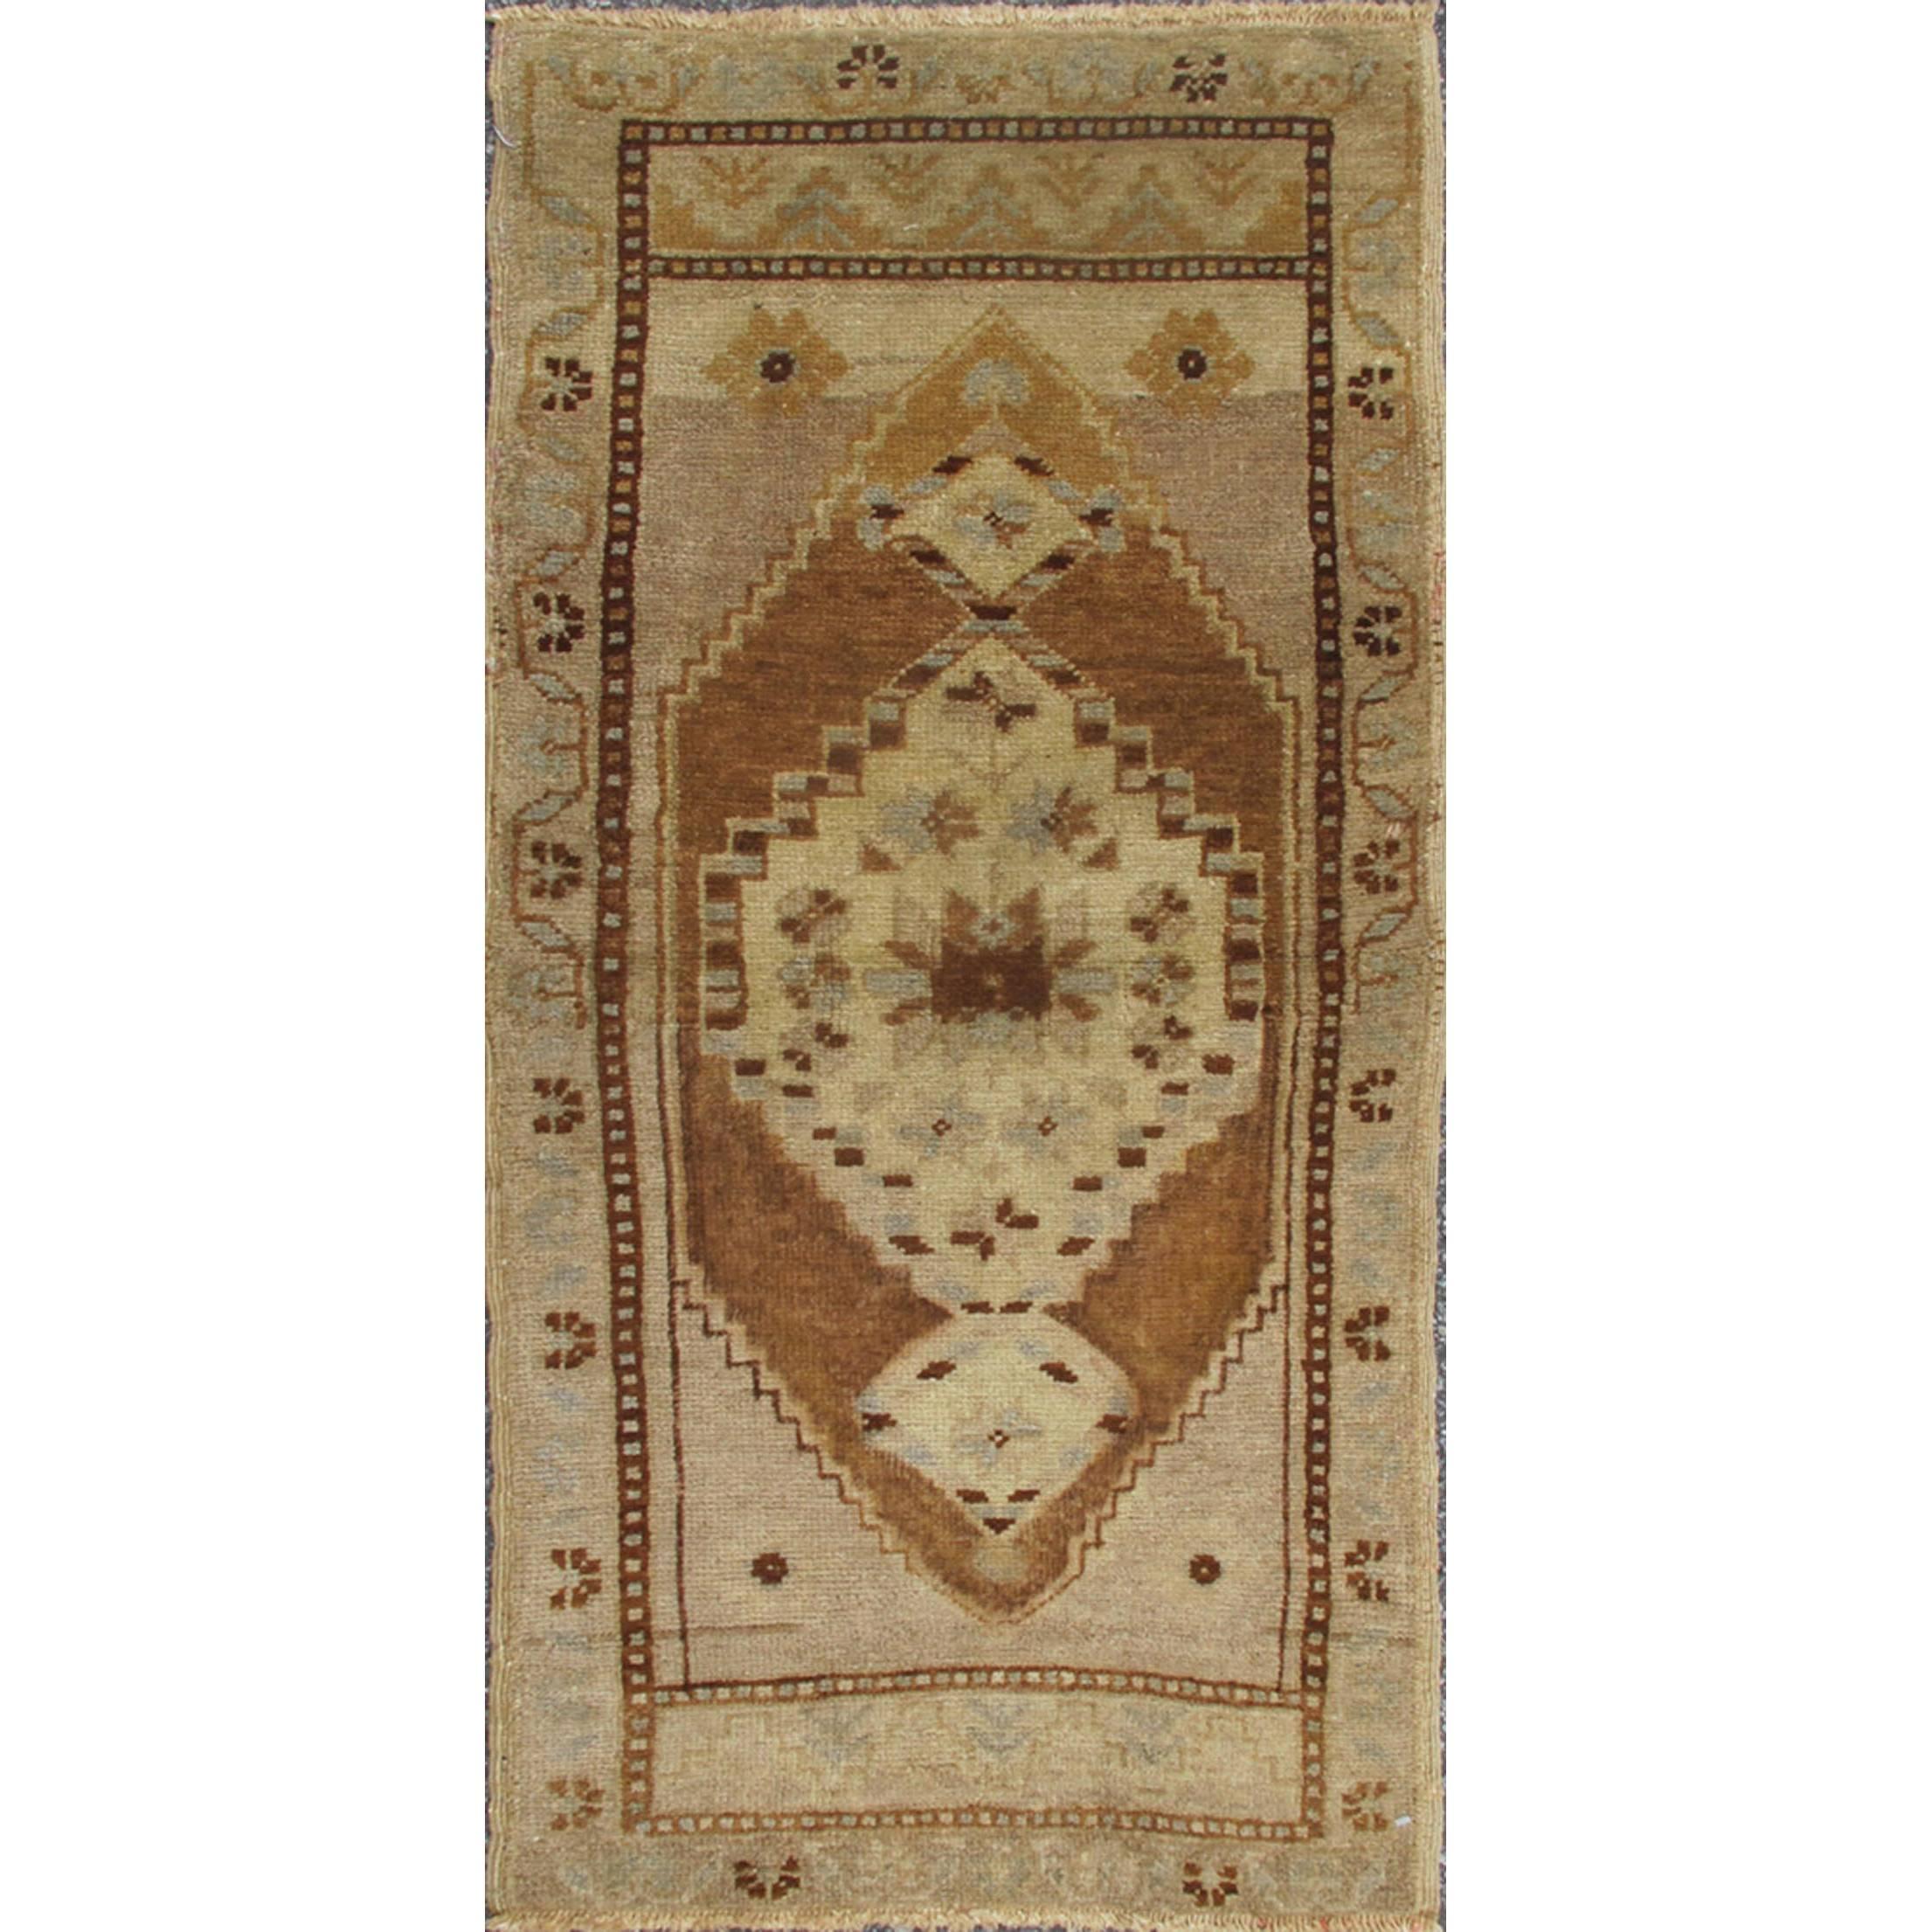 Small Turkish Oushak Carpet with Central Medallion in Light Brown, Taupe & Gray